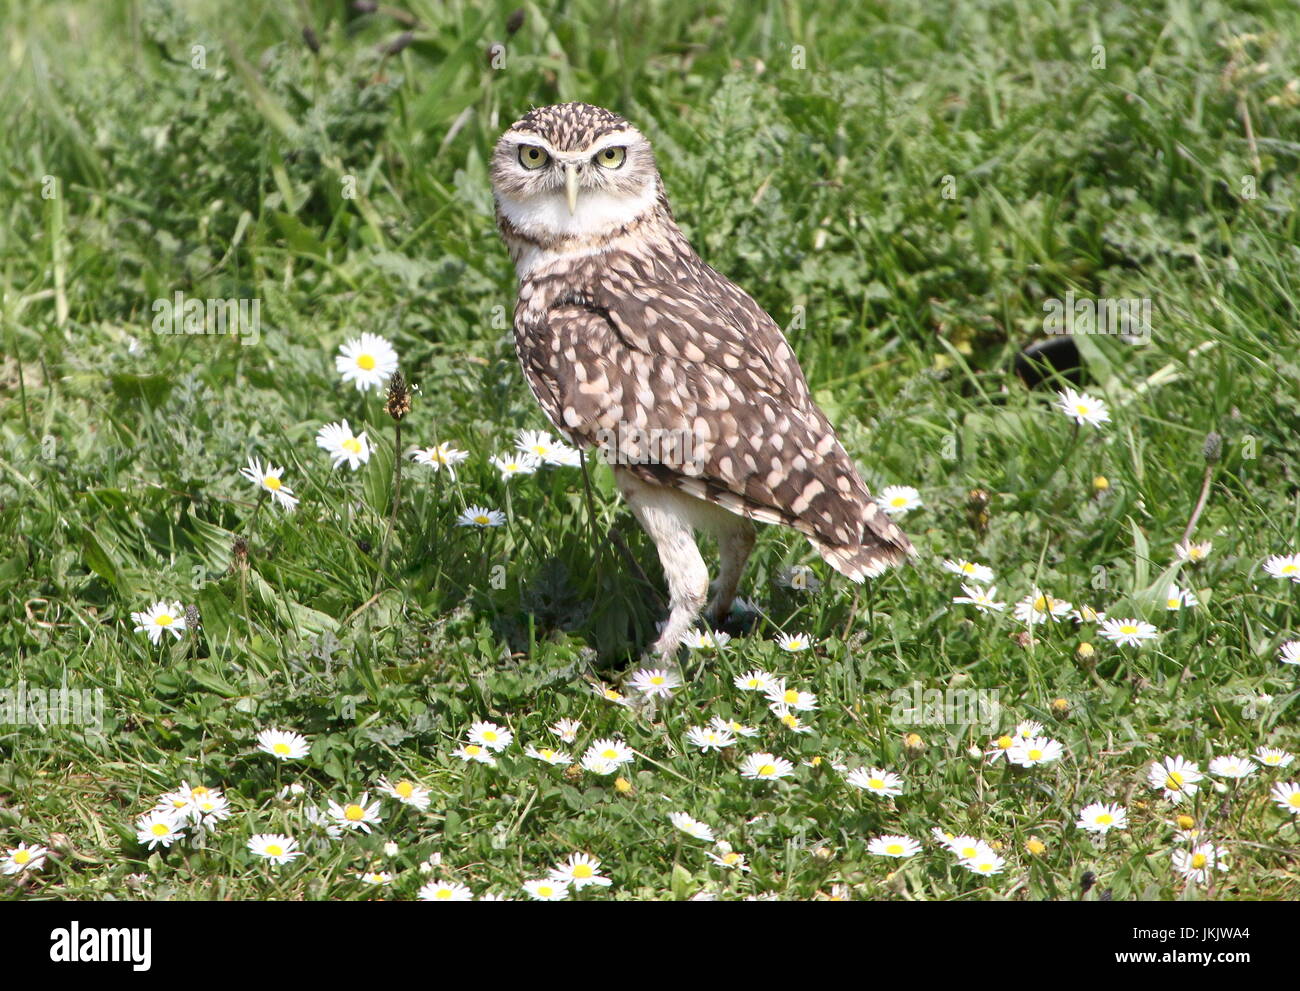 New World Burrowing owl (Athene cunicularia) walking in the grass in summer. Stock Photo